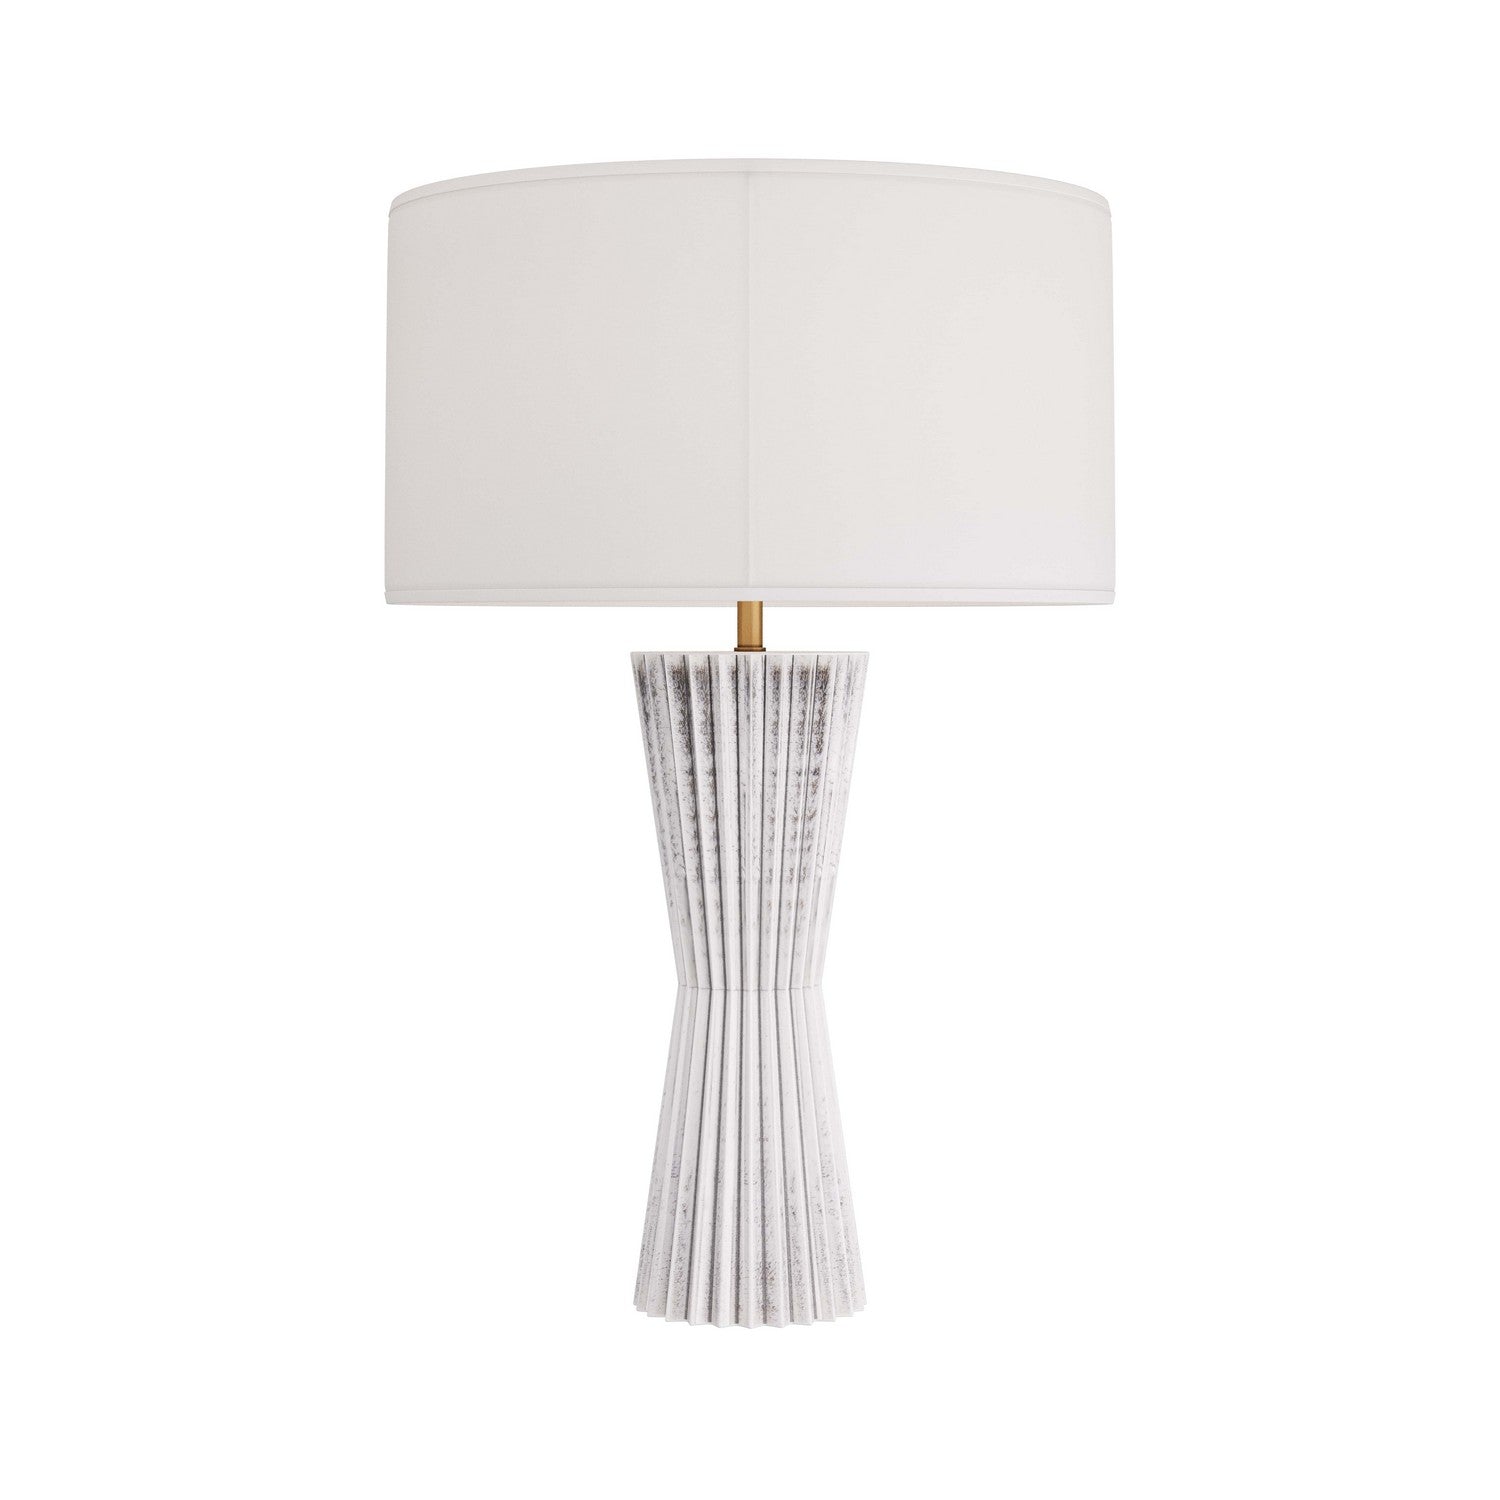 One Light Table Lamp from the Vayla collection in Ice Reactive finish